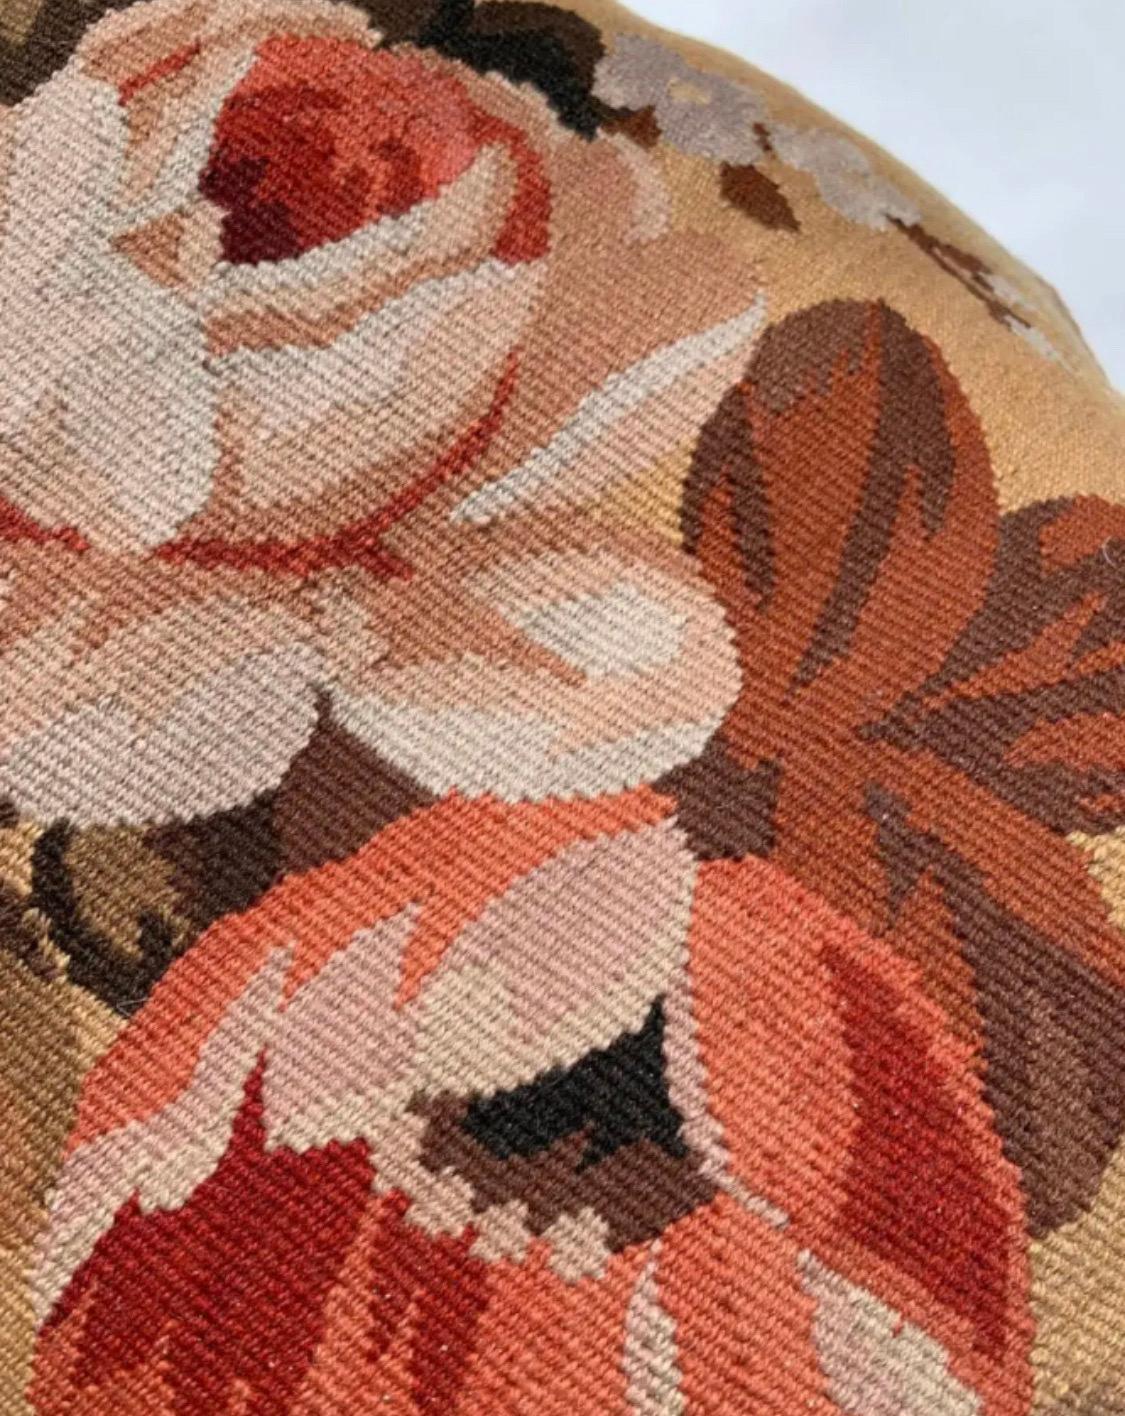 Chinese Shahkar Floral French Provincial Needlepoint Square Pillow